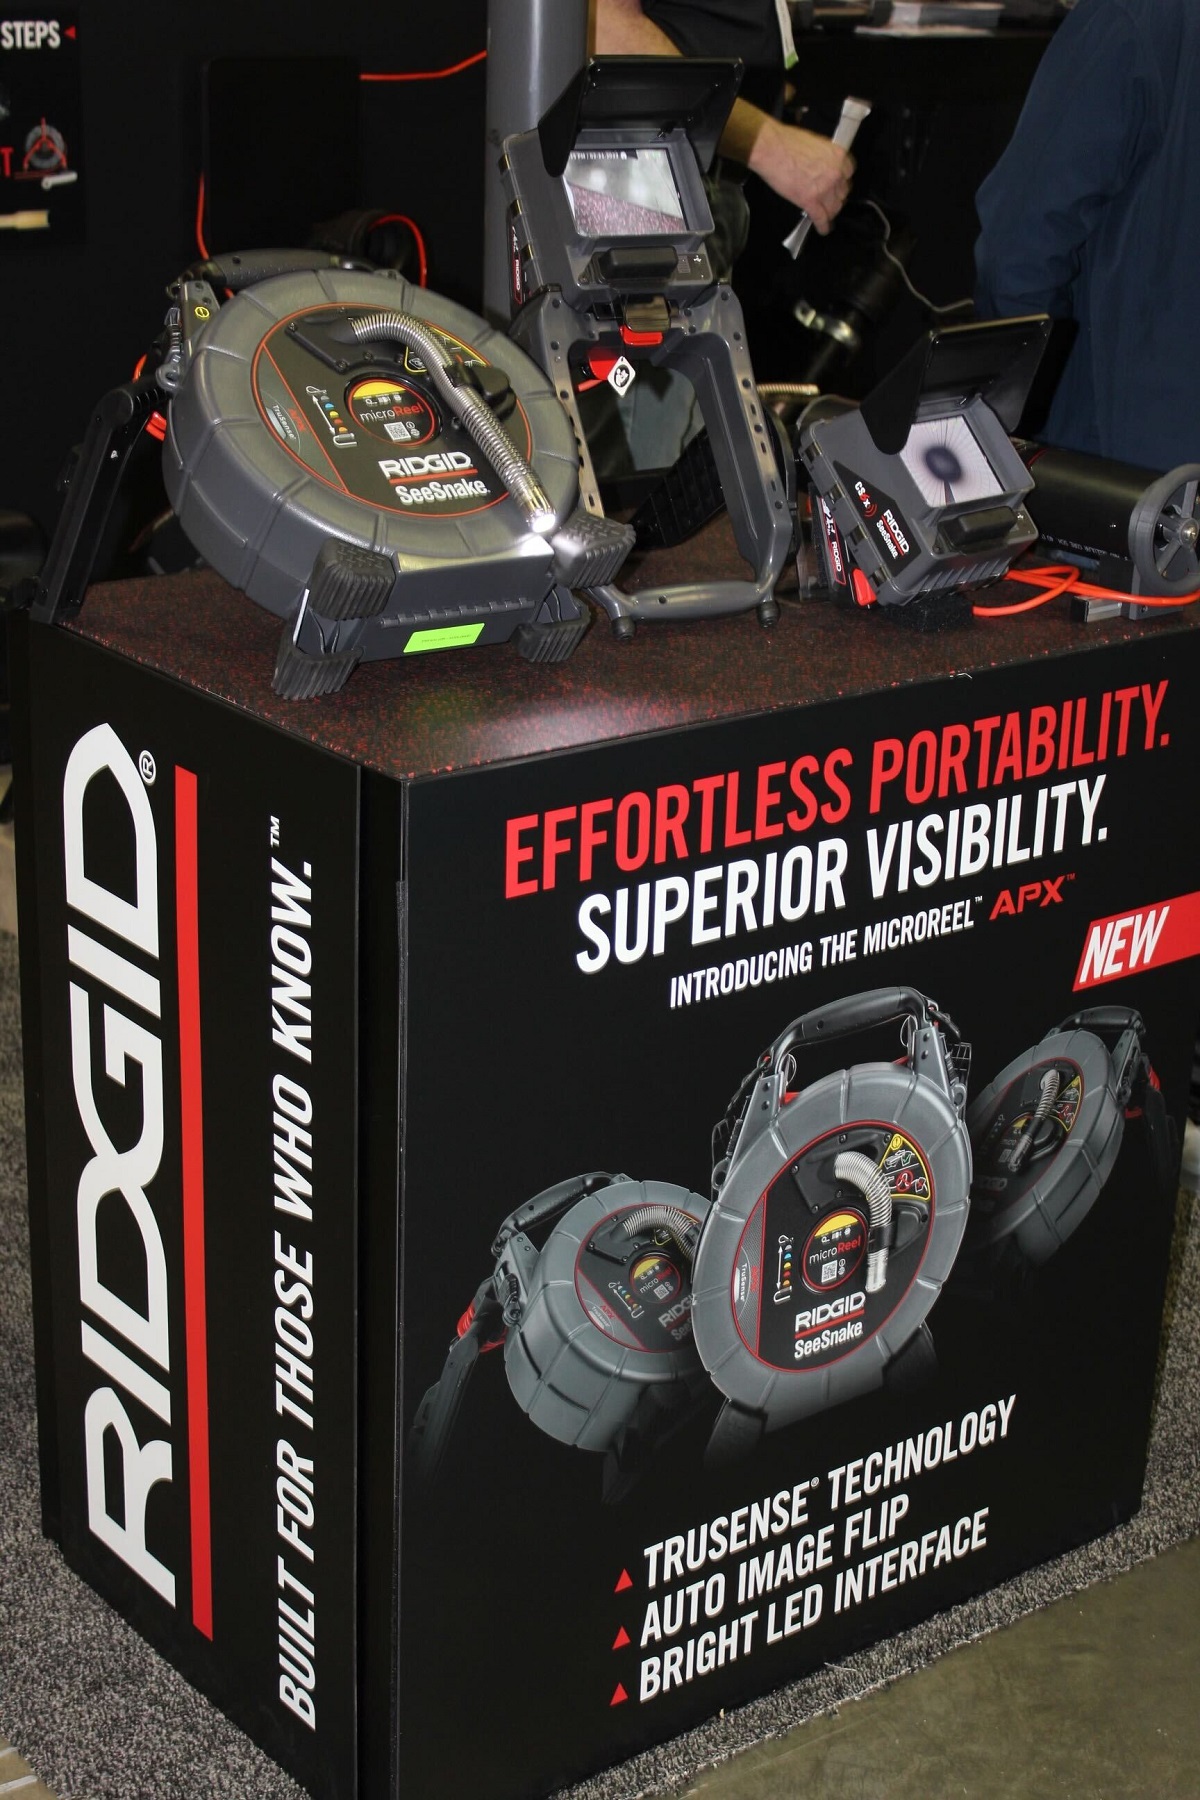 RIDGID® to Feature New SeeSnake® microReel™ APX™ at the